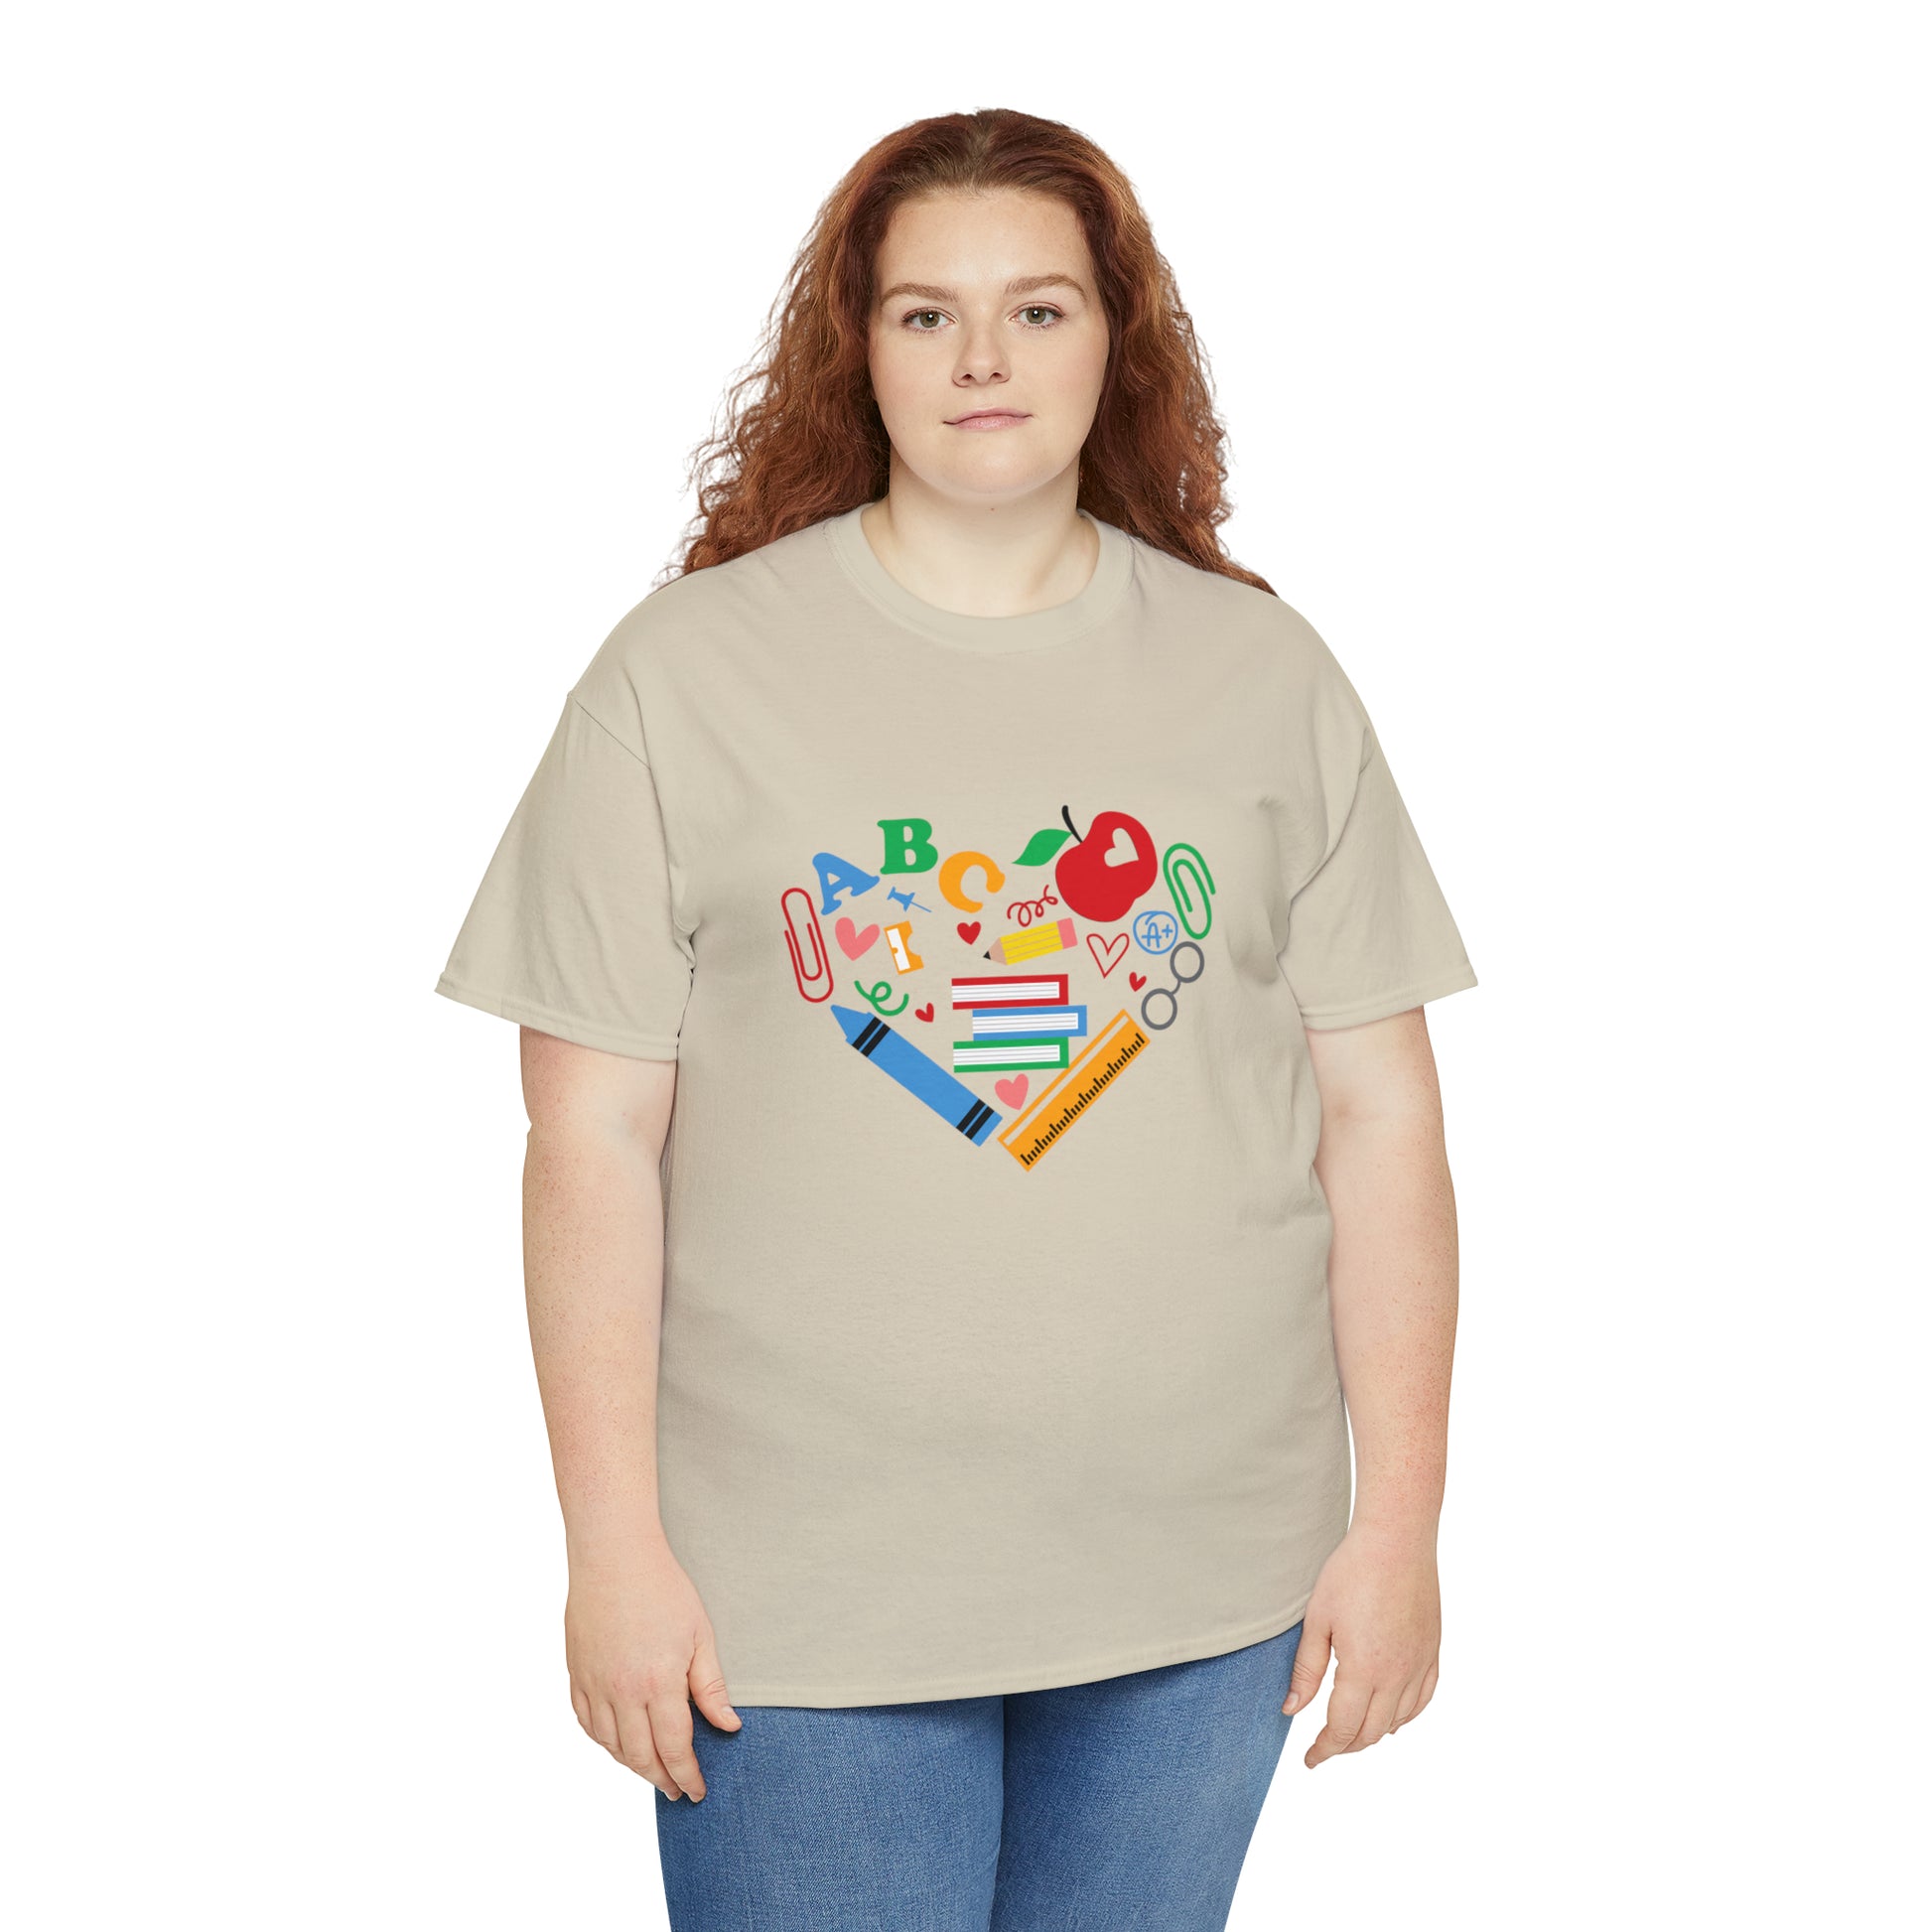 Red haired woman wearing the plus-size Sand shirt